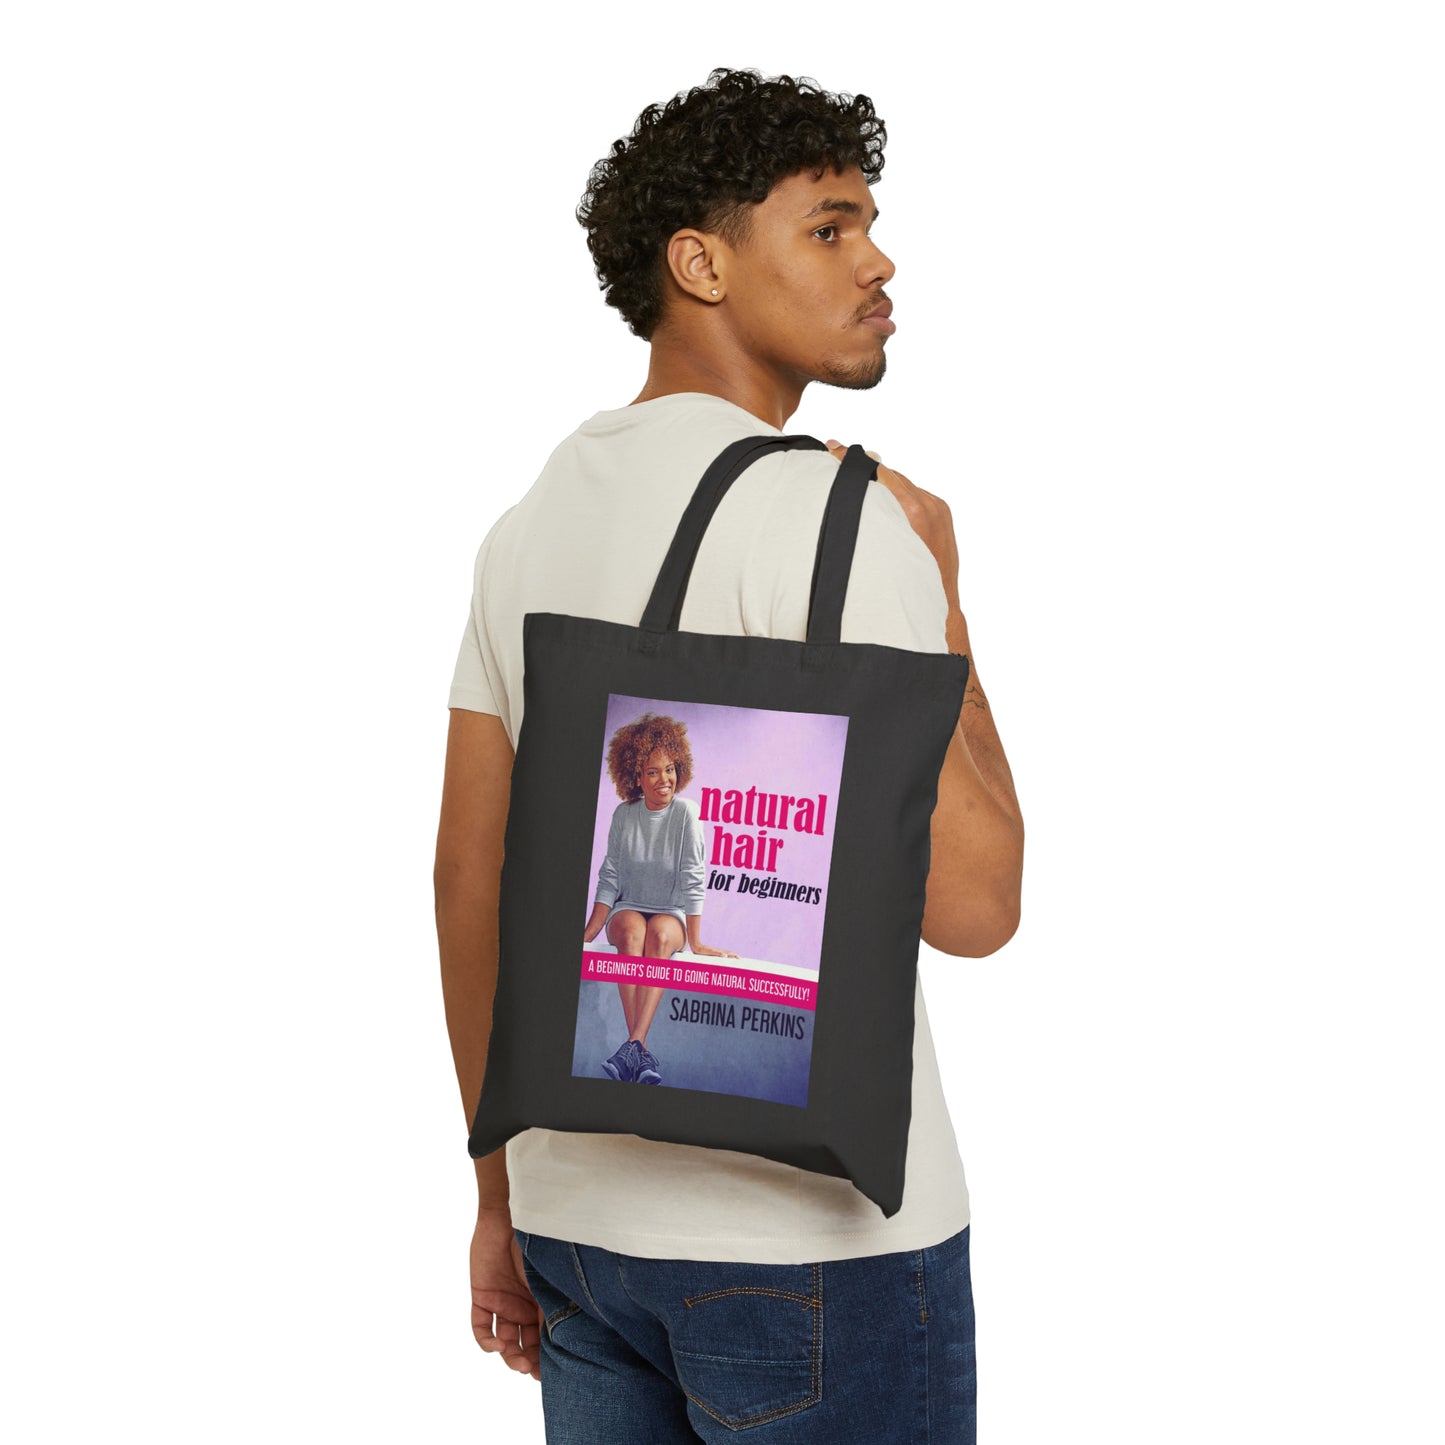 Natural Hair For Beginners - Cotton Canvas Tote Bag